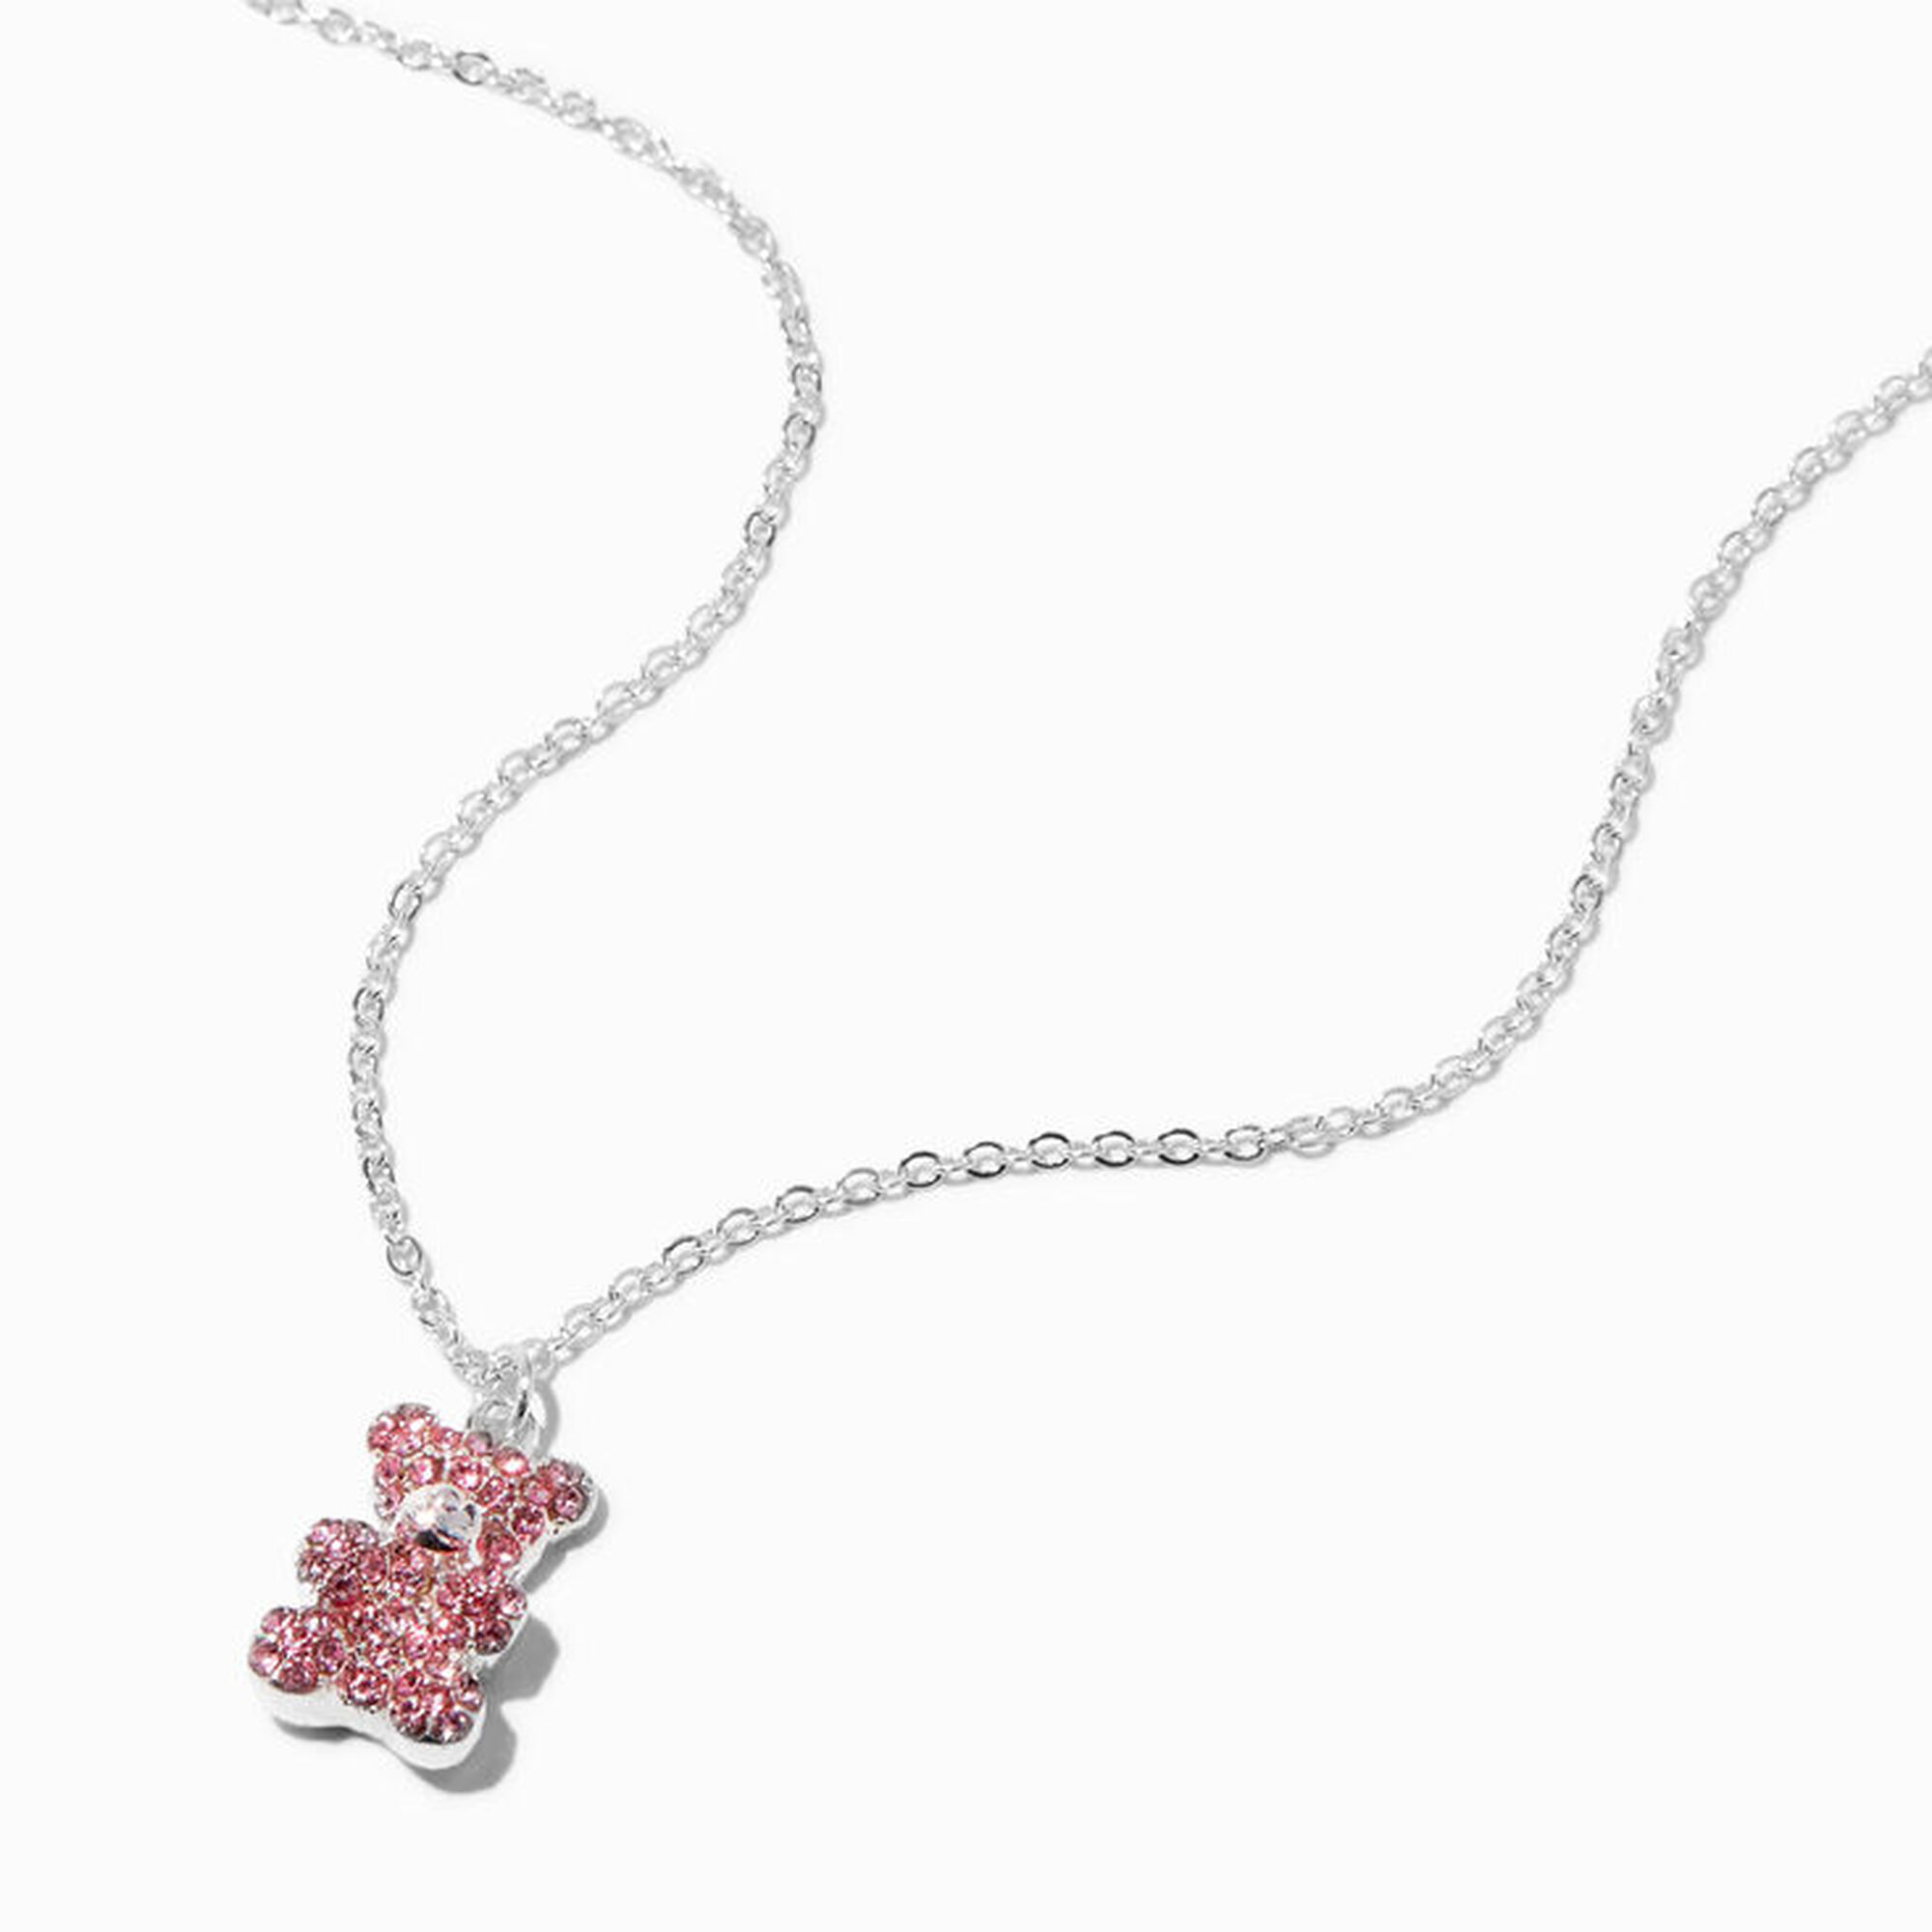 View Claires Rhinestone Teddy Bear Pendant Necklace Pink information